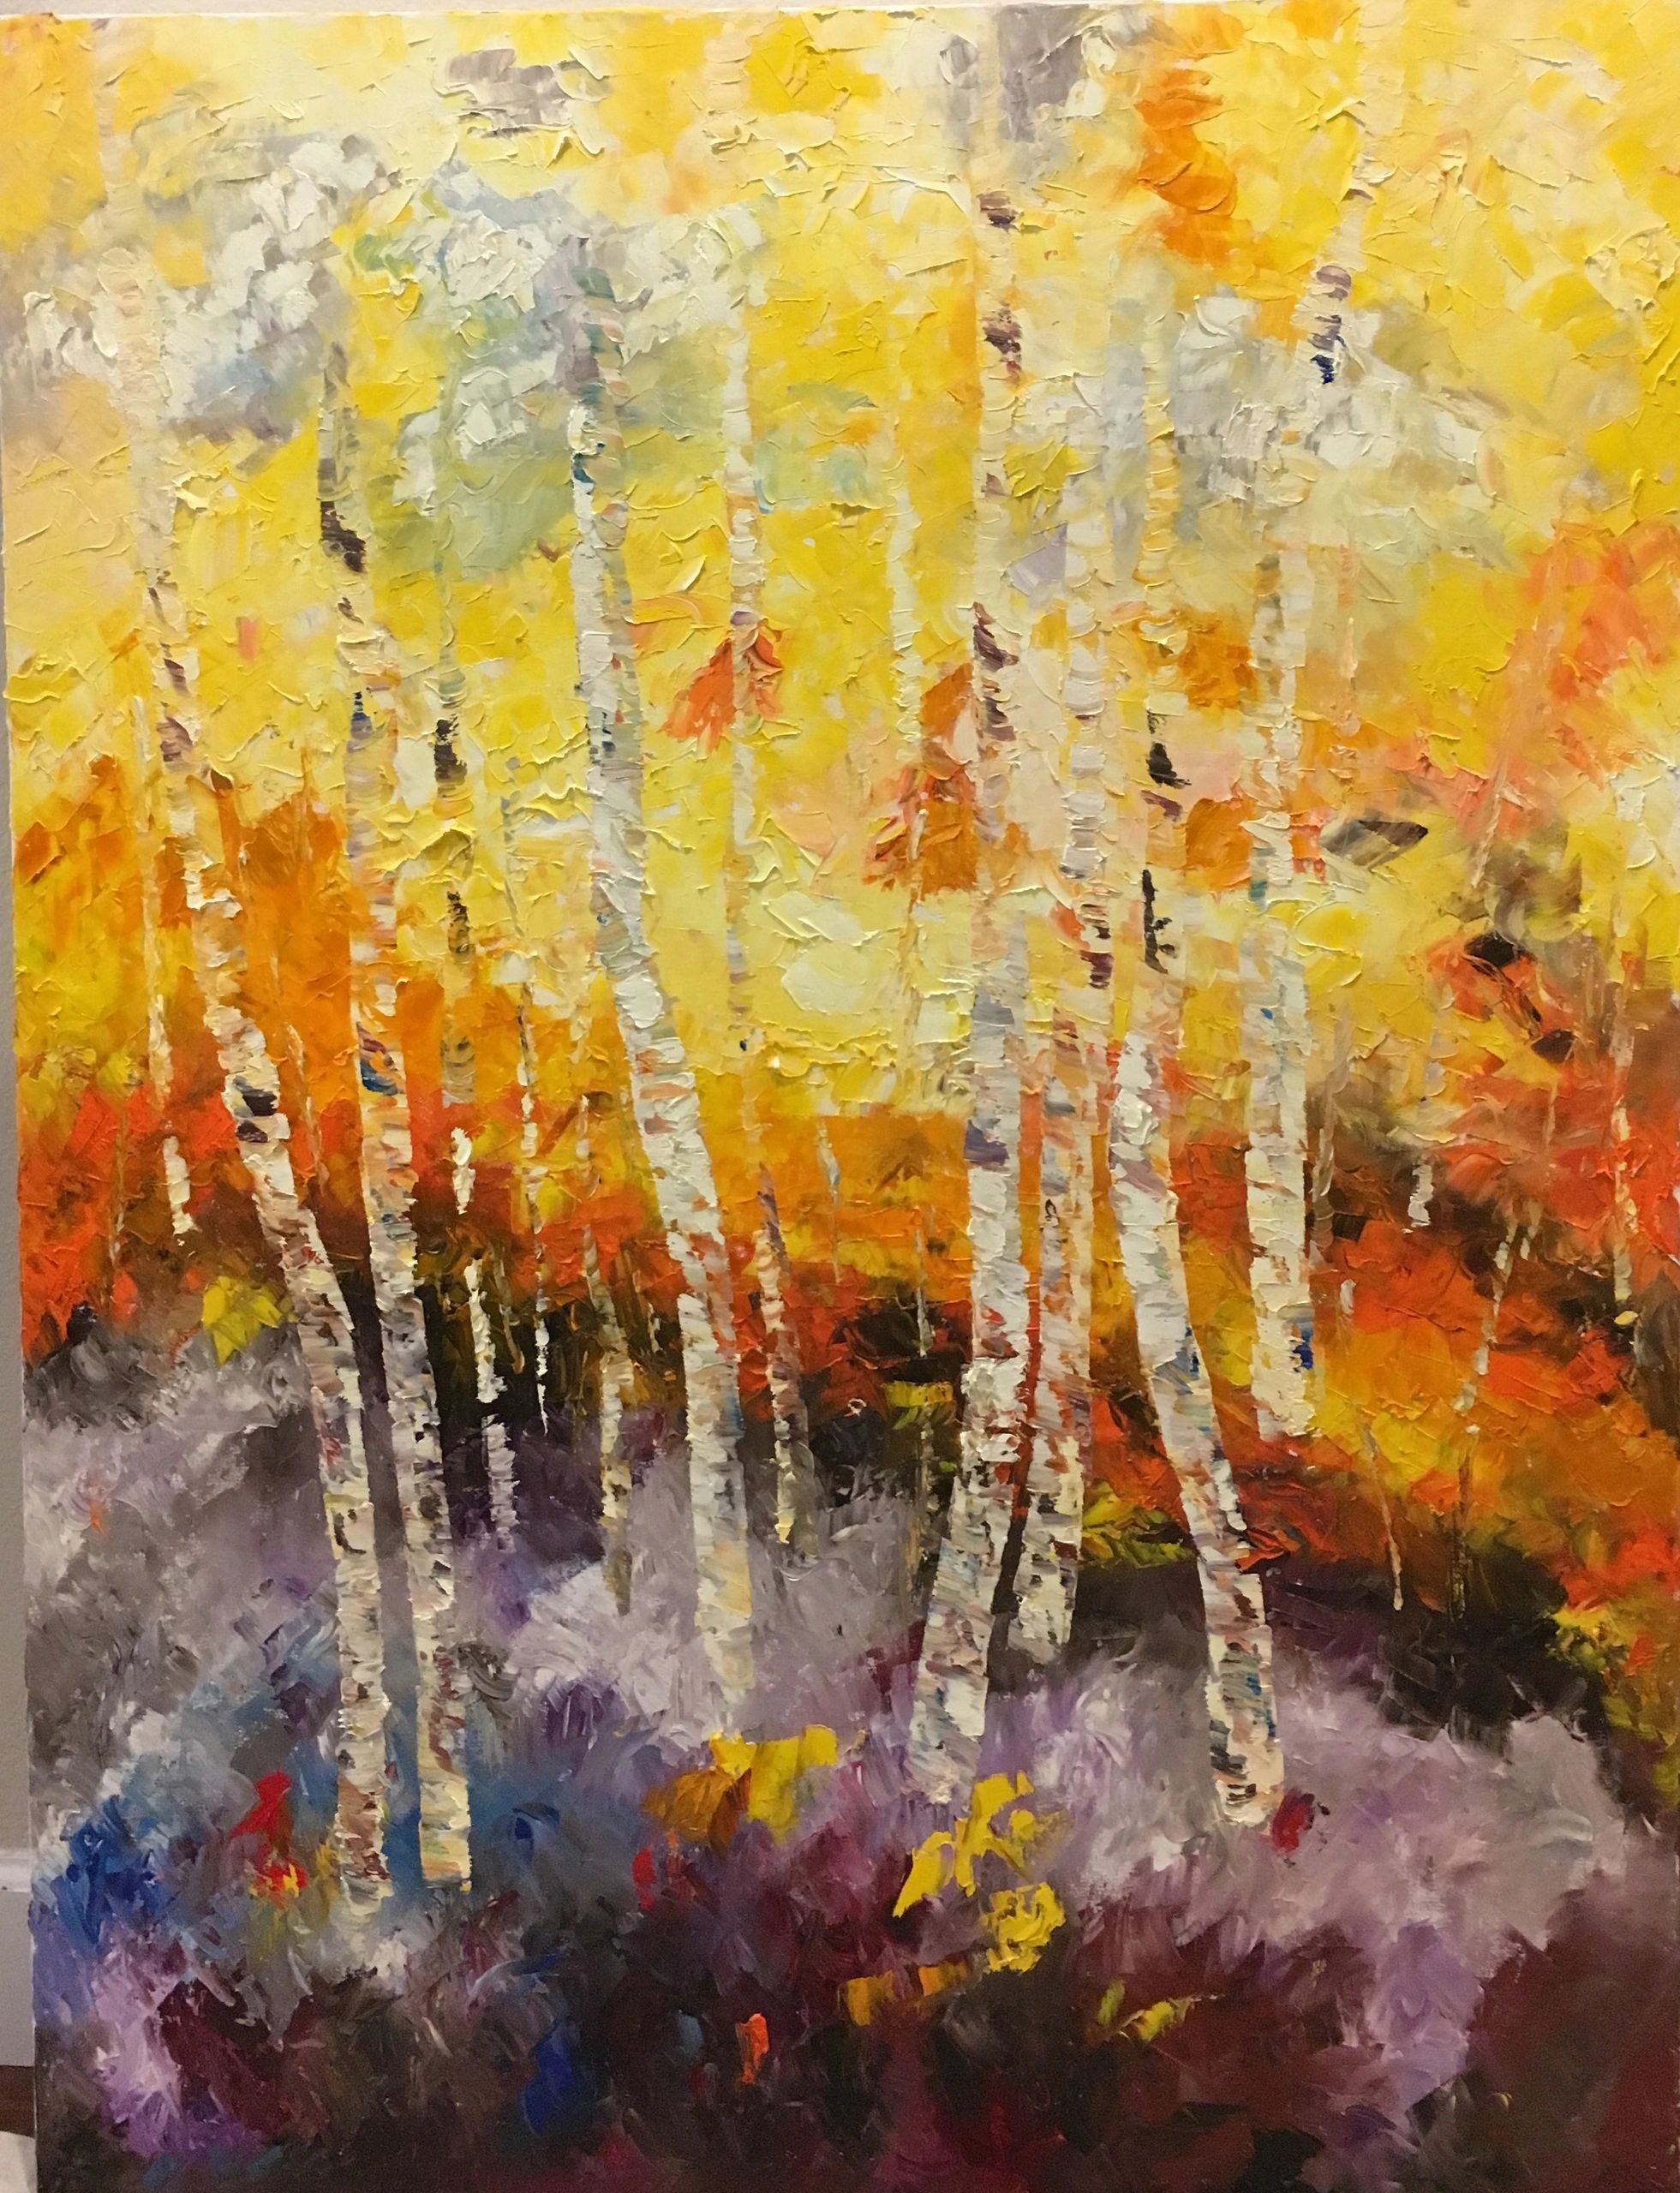 Serenity 
Oil on canvas
Palette knife
36" X 48"